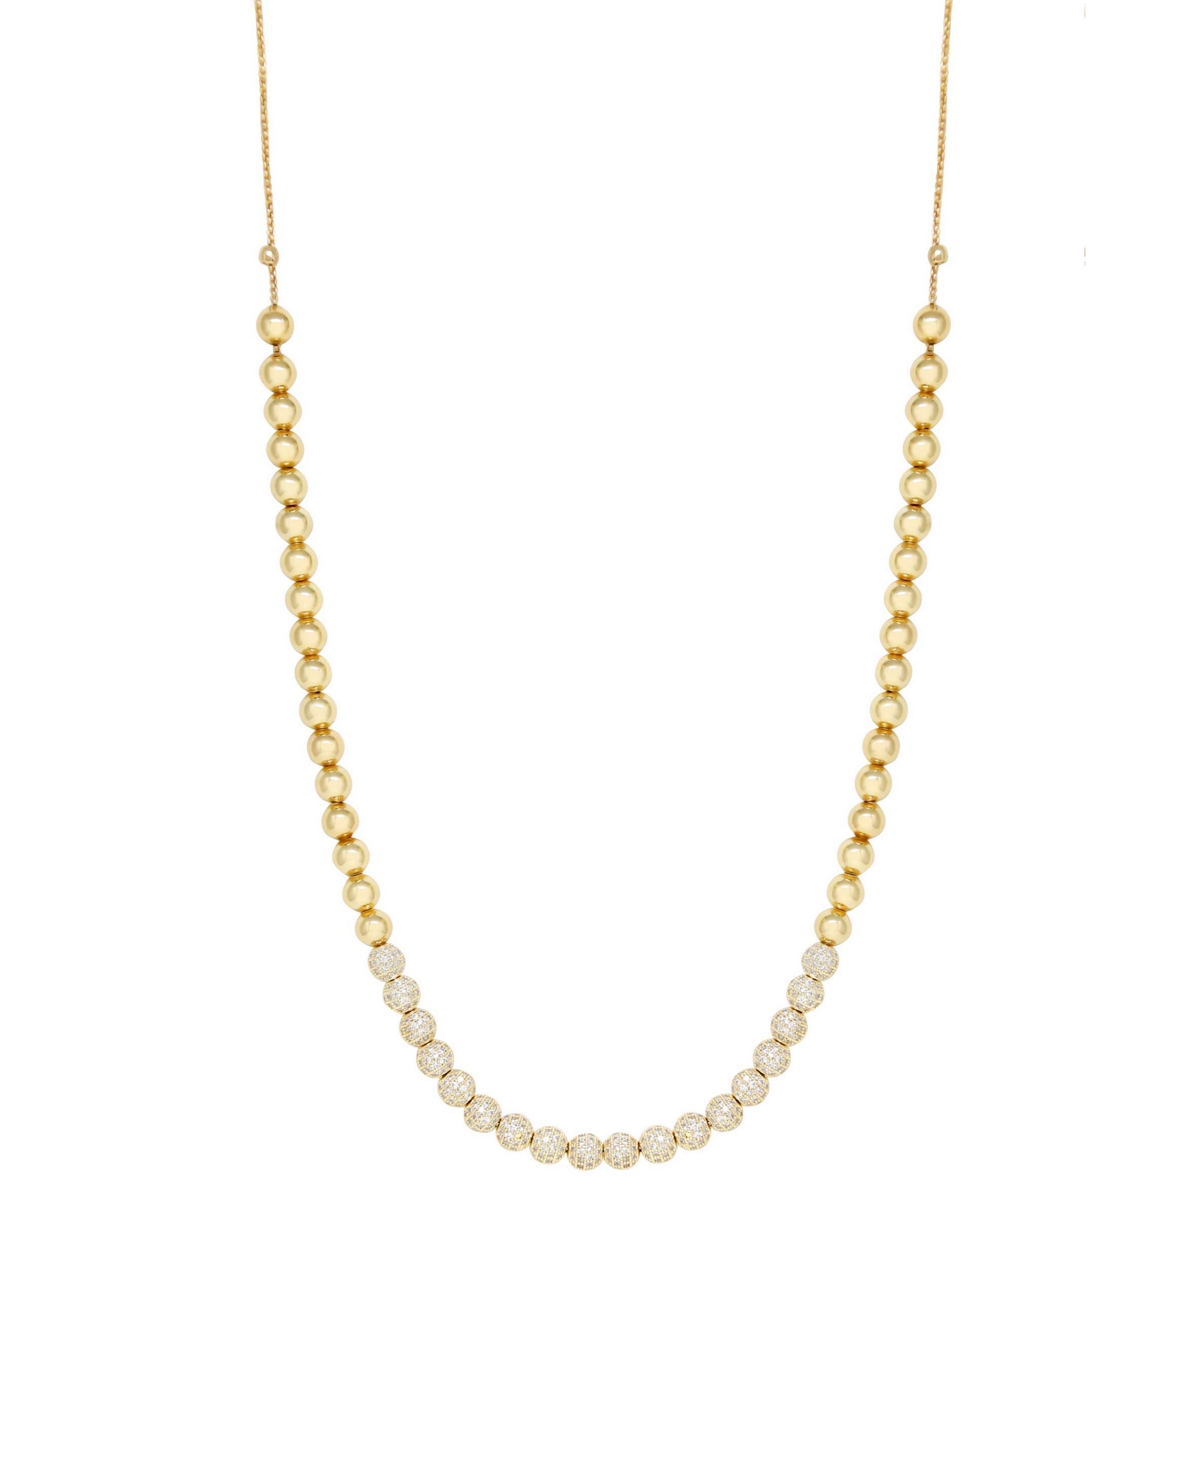 ETTIKA SHOW YOURSELF 18K GOLD PLATED AND CUBIC ZIRCONIA BEAD NECKLACE